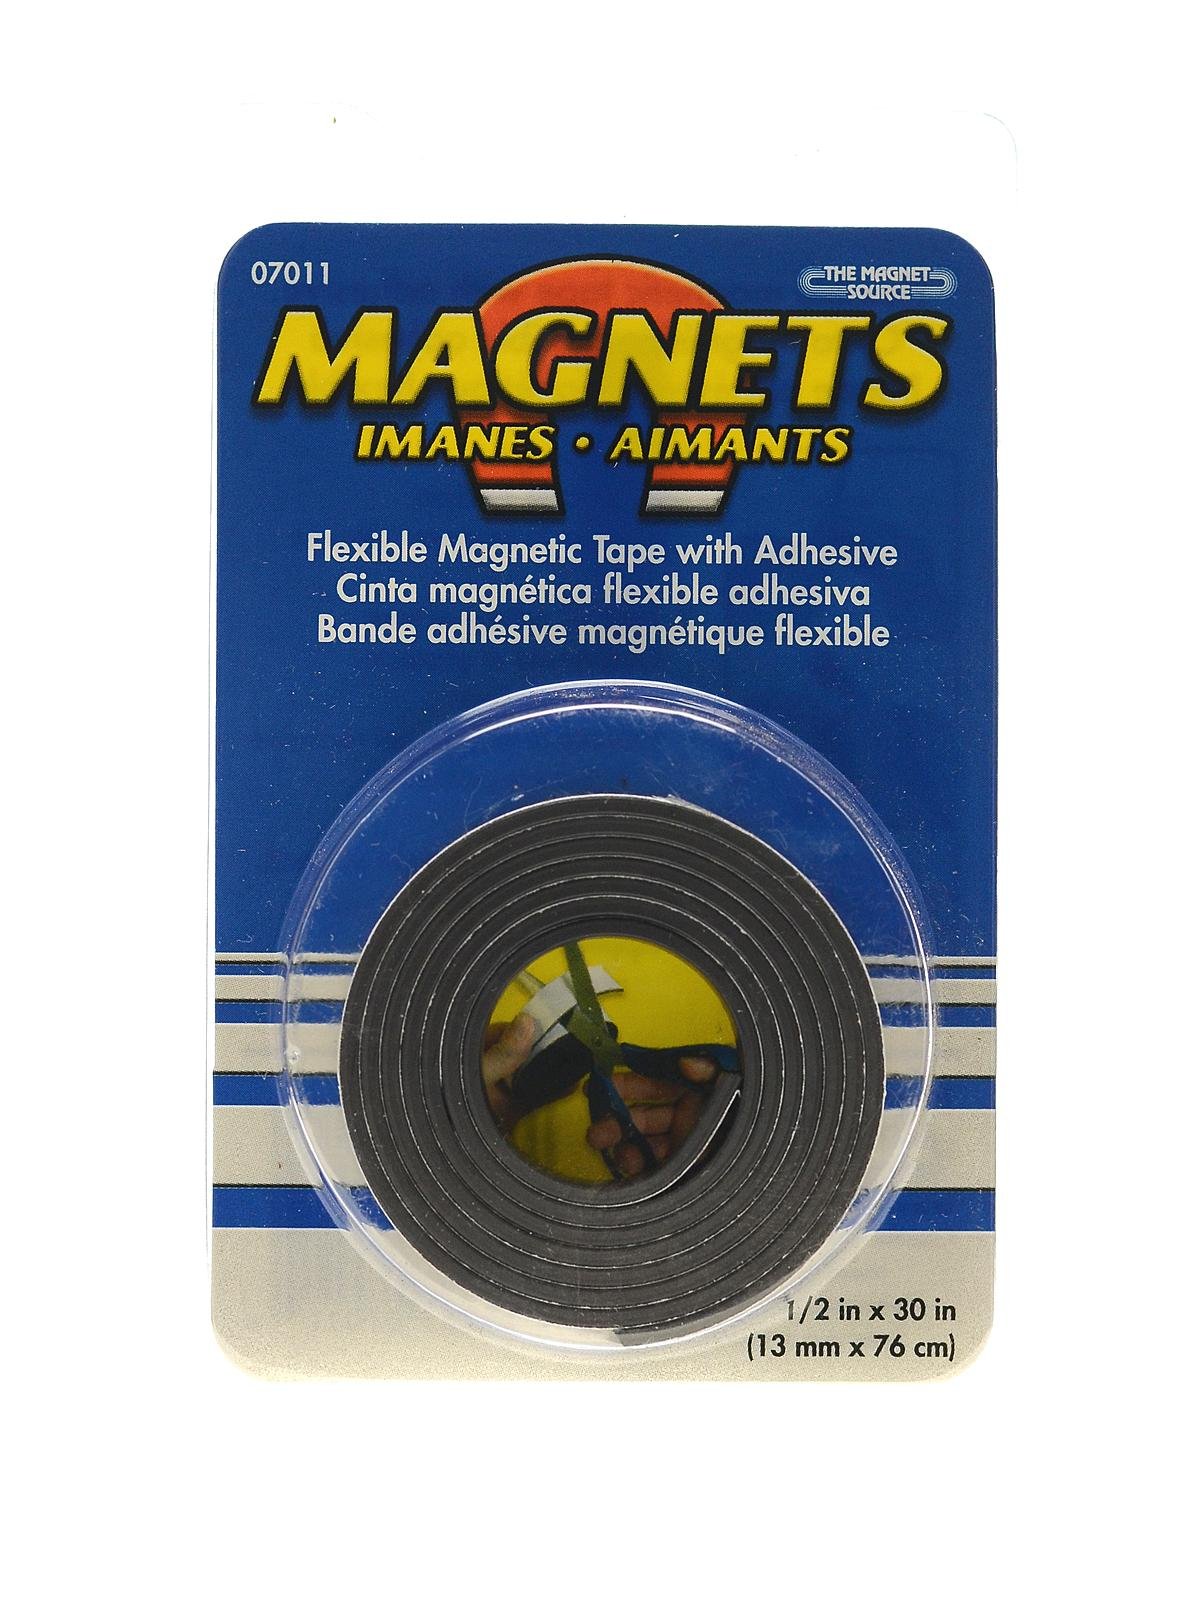 1 Adhesive Magnetic Strips